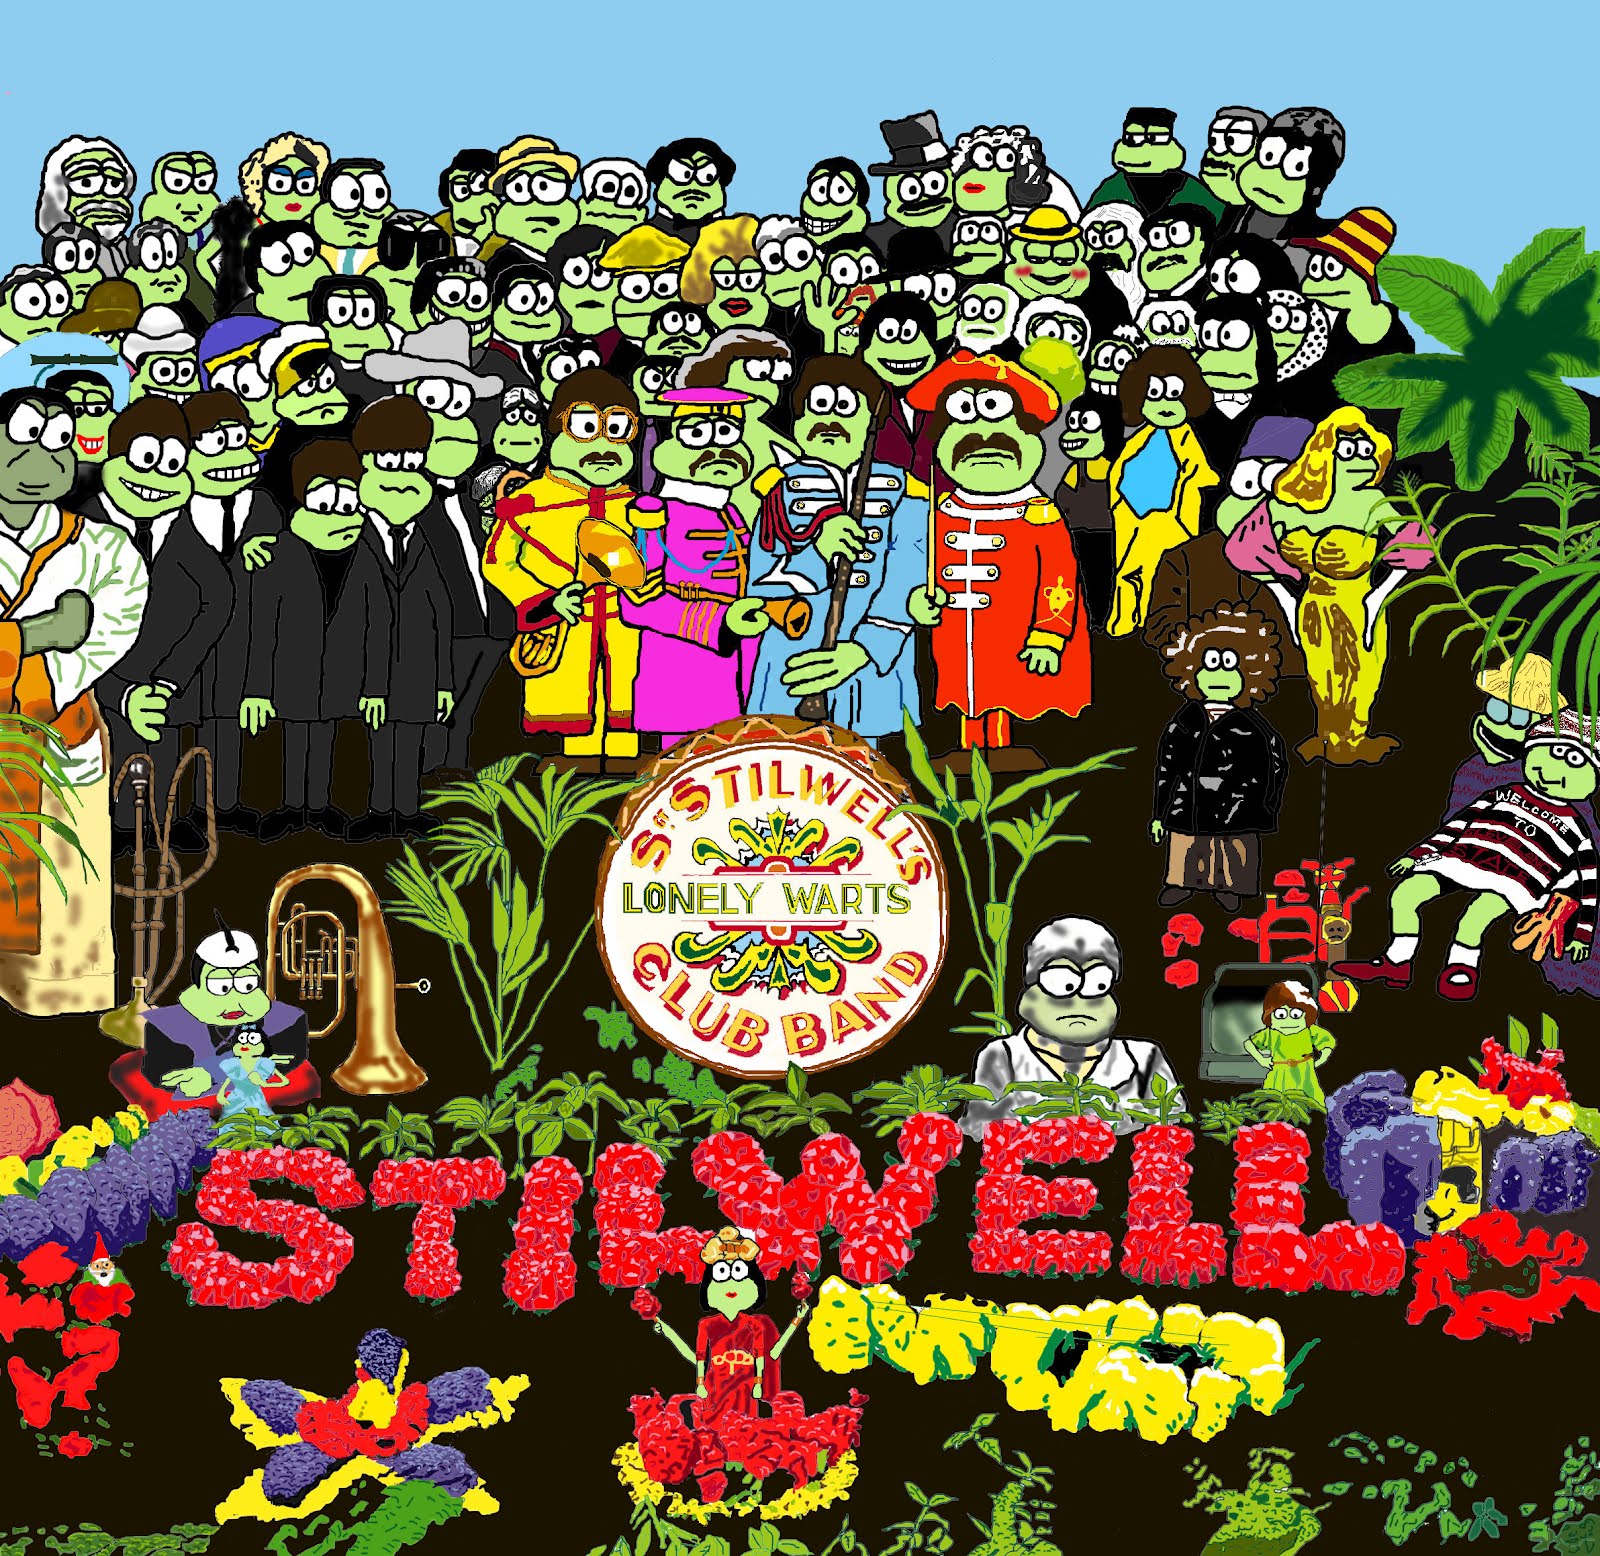 Gimme Top 5 : Best album covers of the 60s – Still in Rock